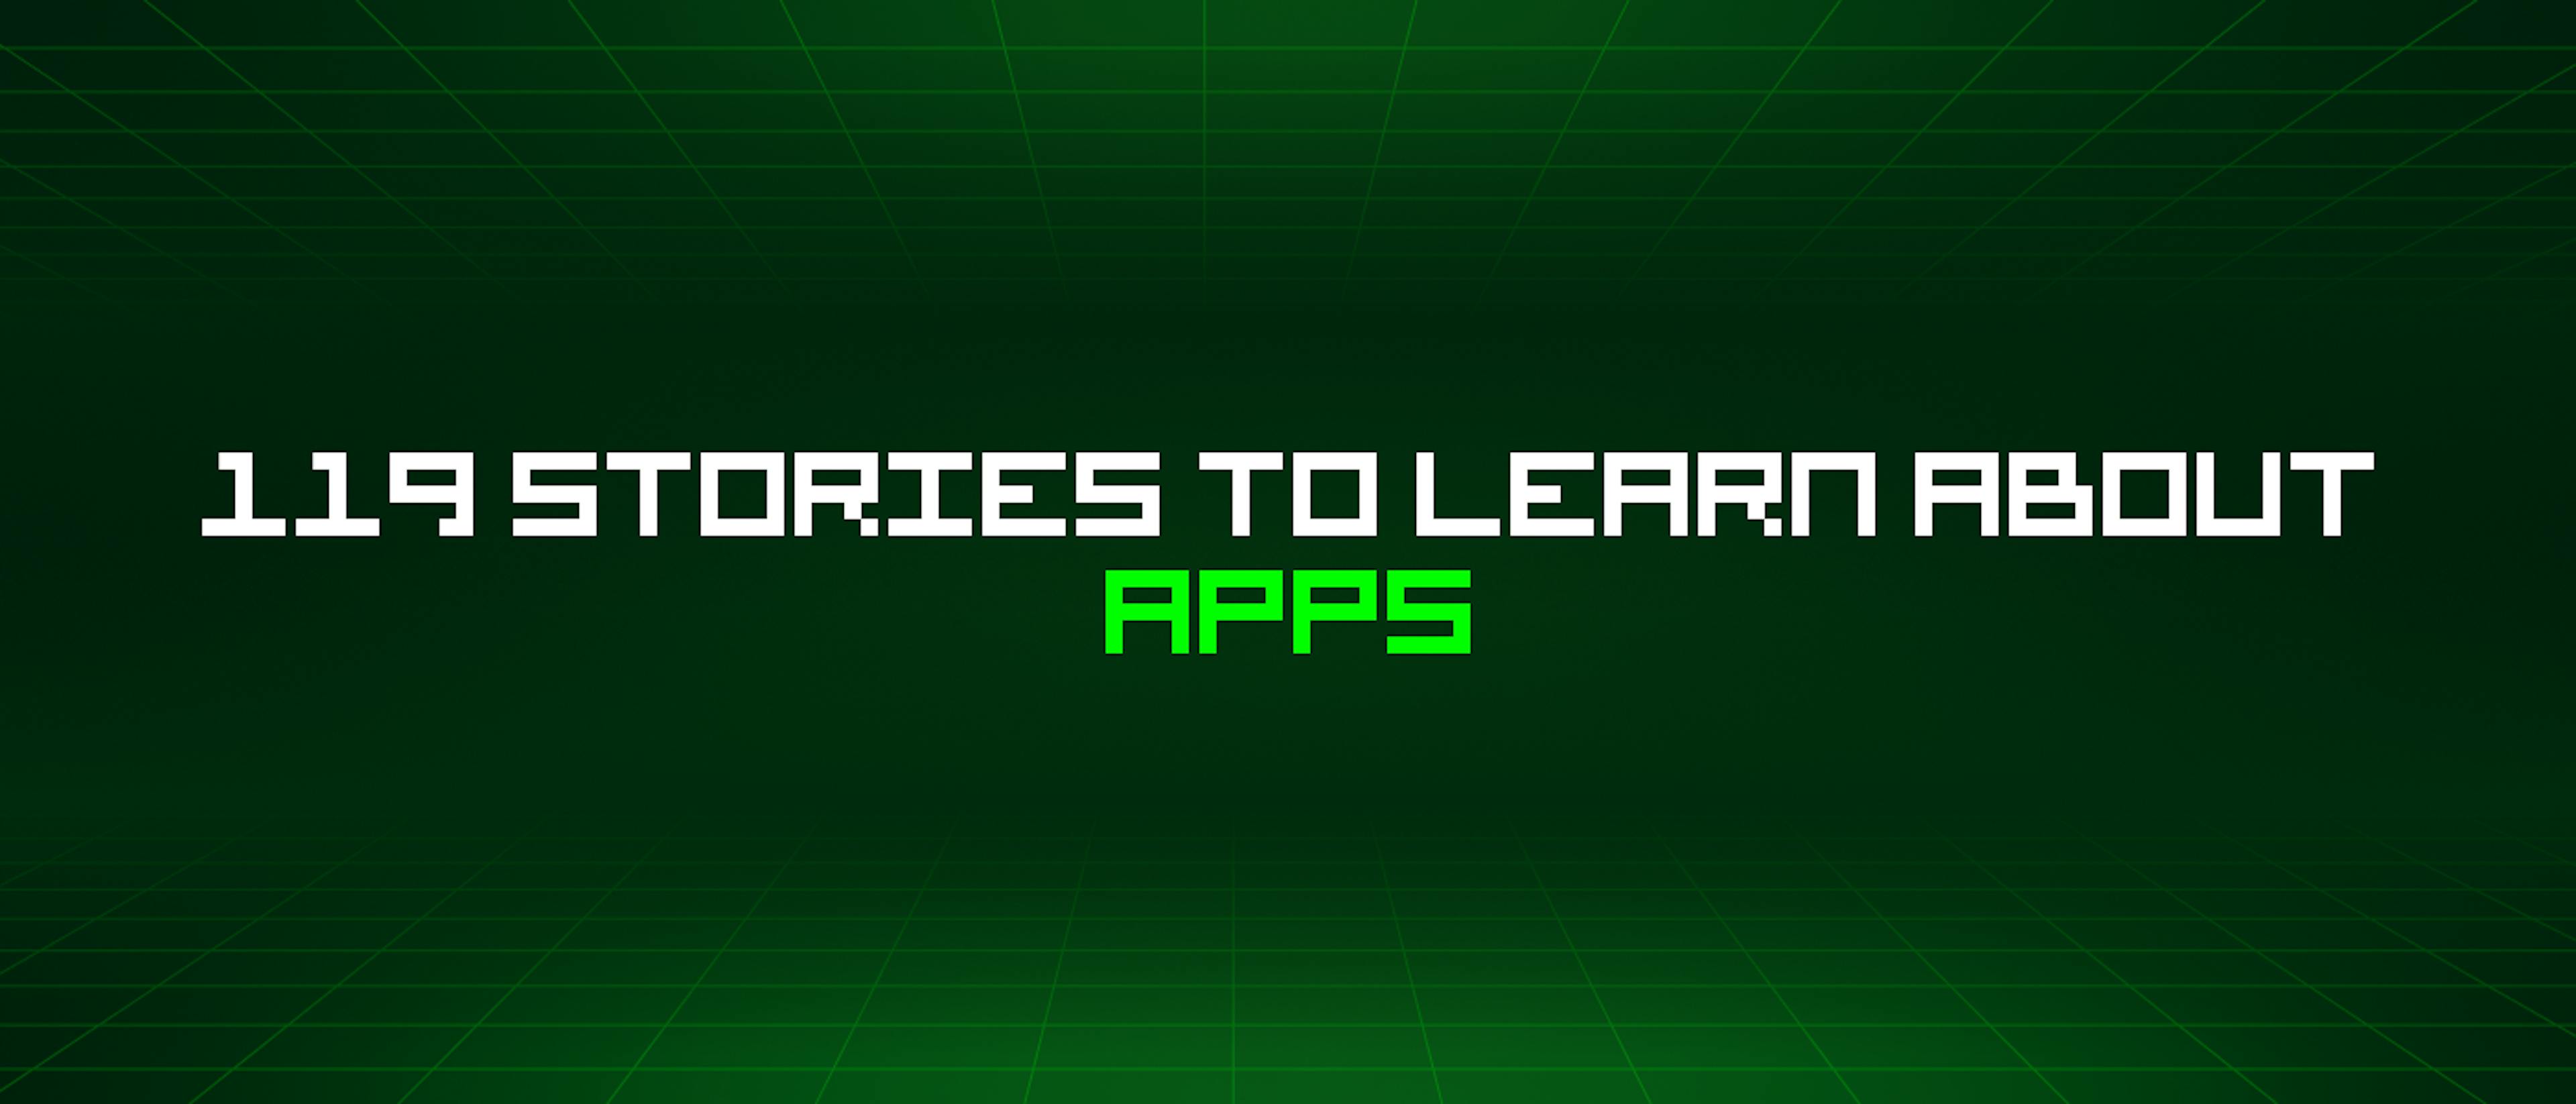 featured image - 119 Stories To Learn About Apps